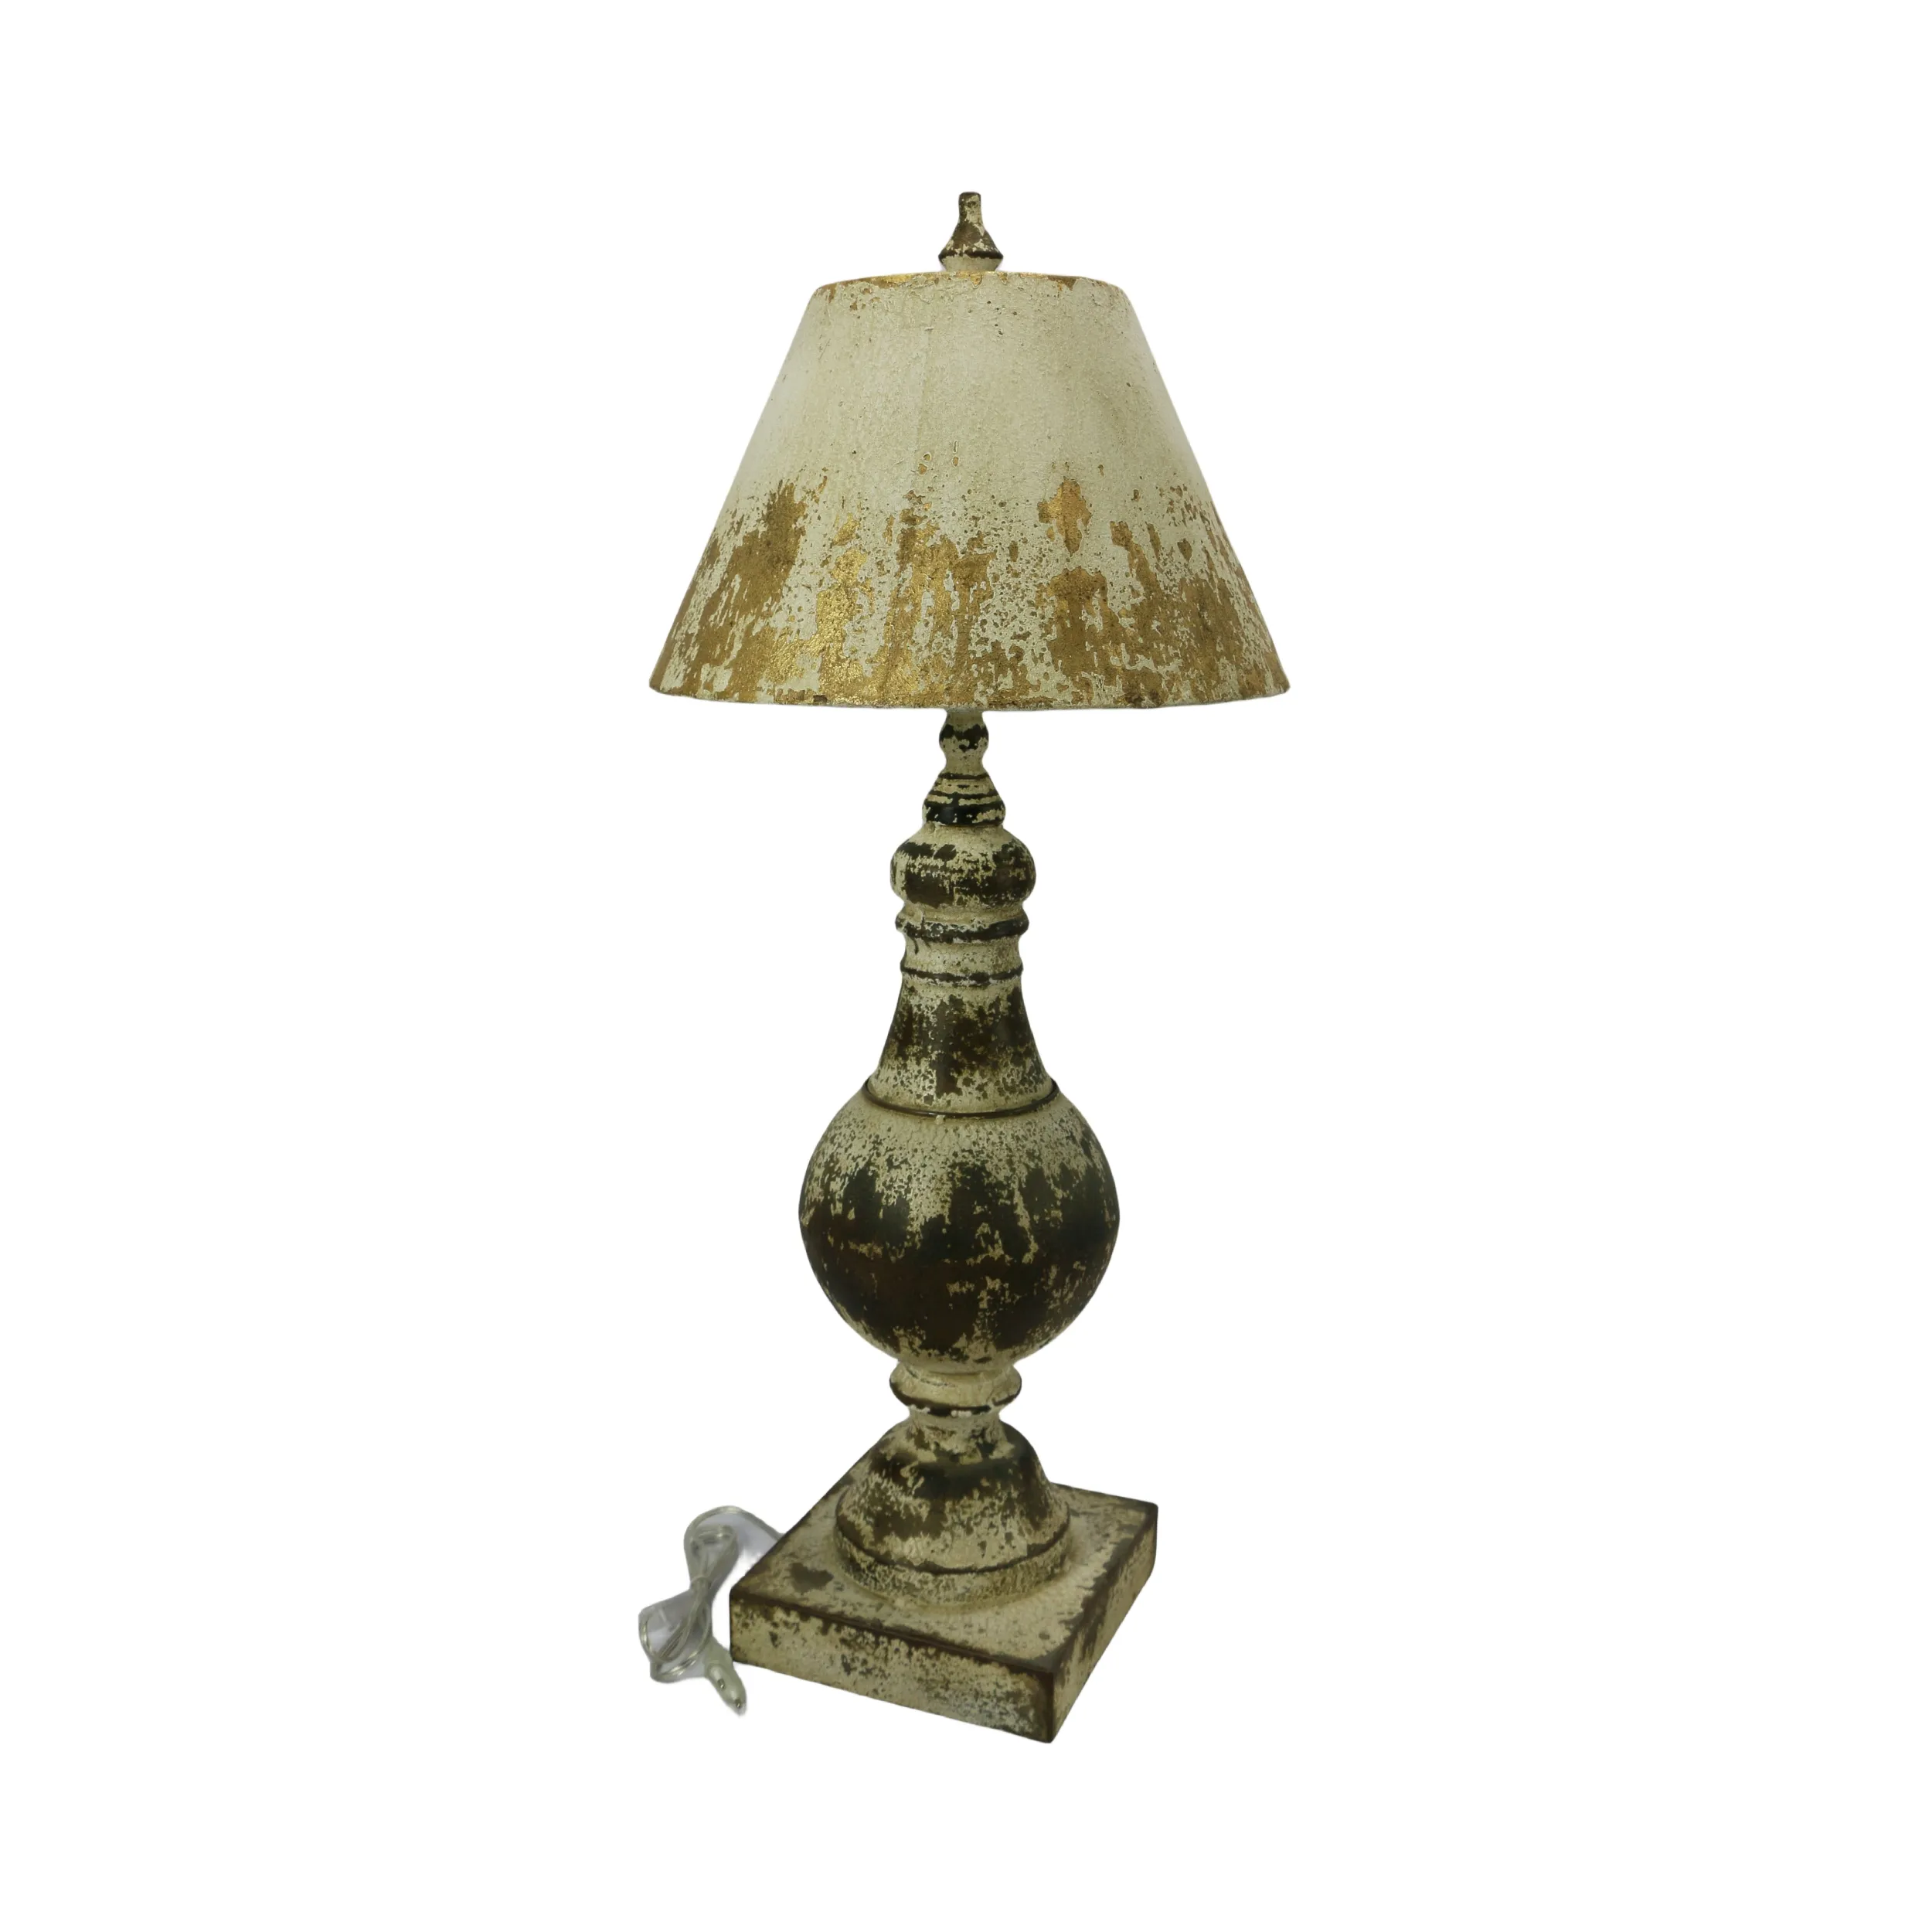 Floral Bouquet Table Lamp with Distressed Finish - Ornate Vintage Light for Classical Ambiance